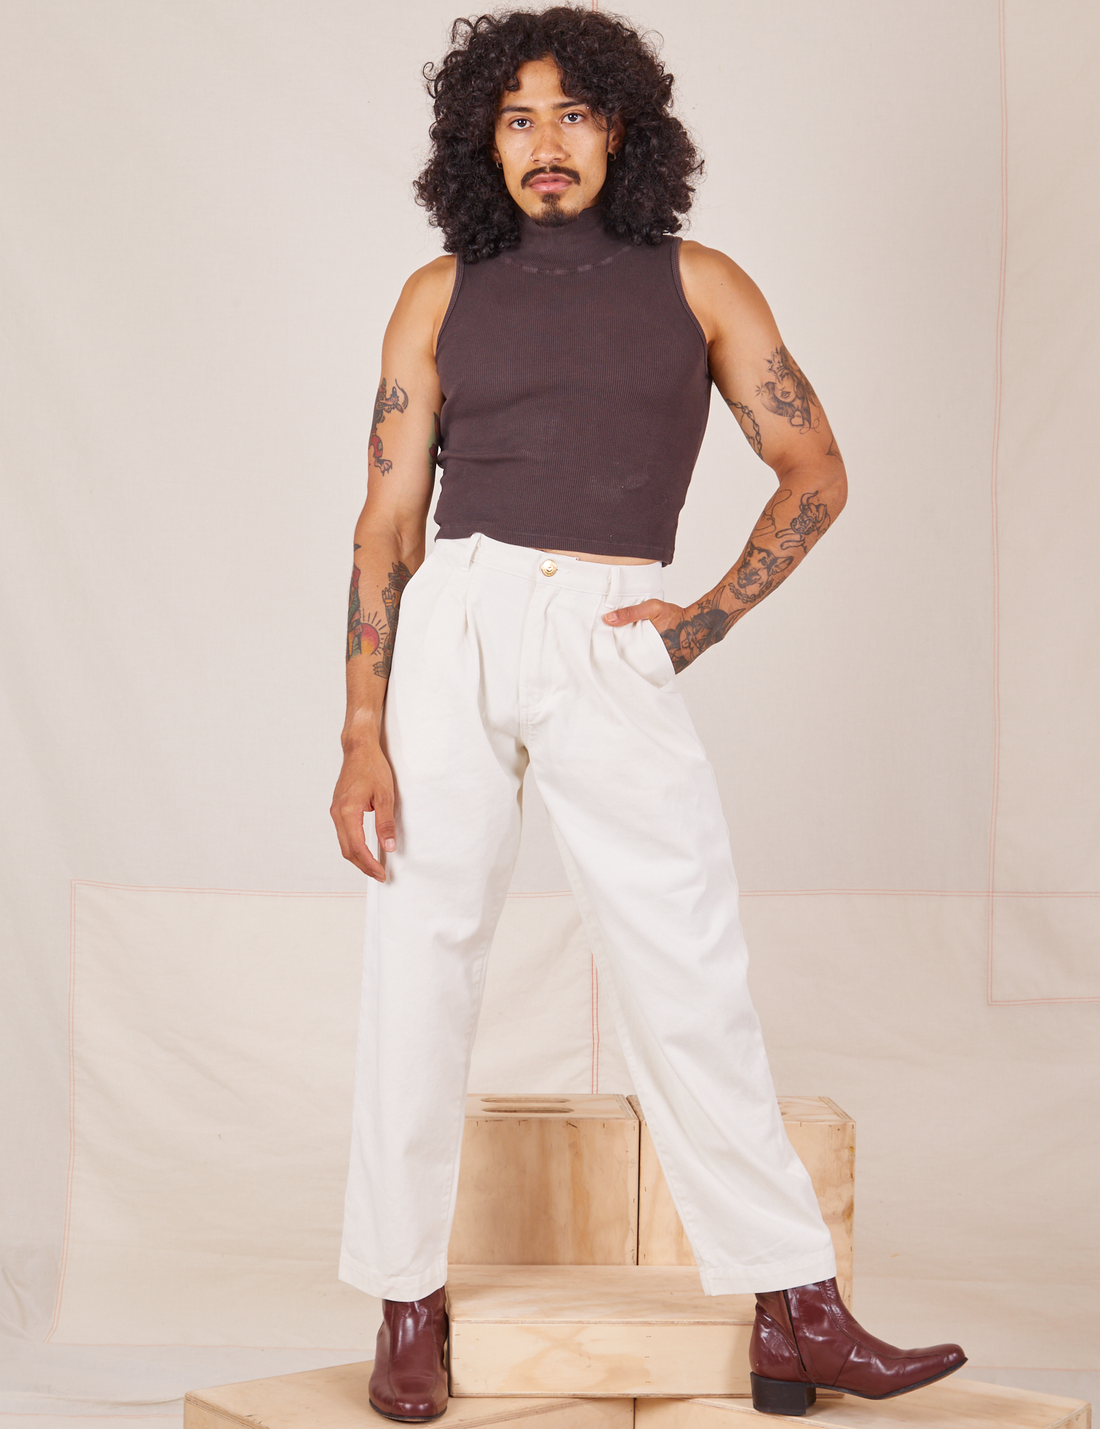 Jesse is 5'8" and wearing XXS Heavyweight Trousers in Vintage Off-White and espresso brown Sleeveless Turtleneck.